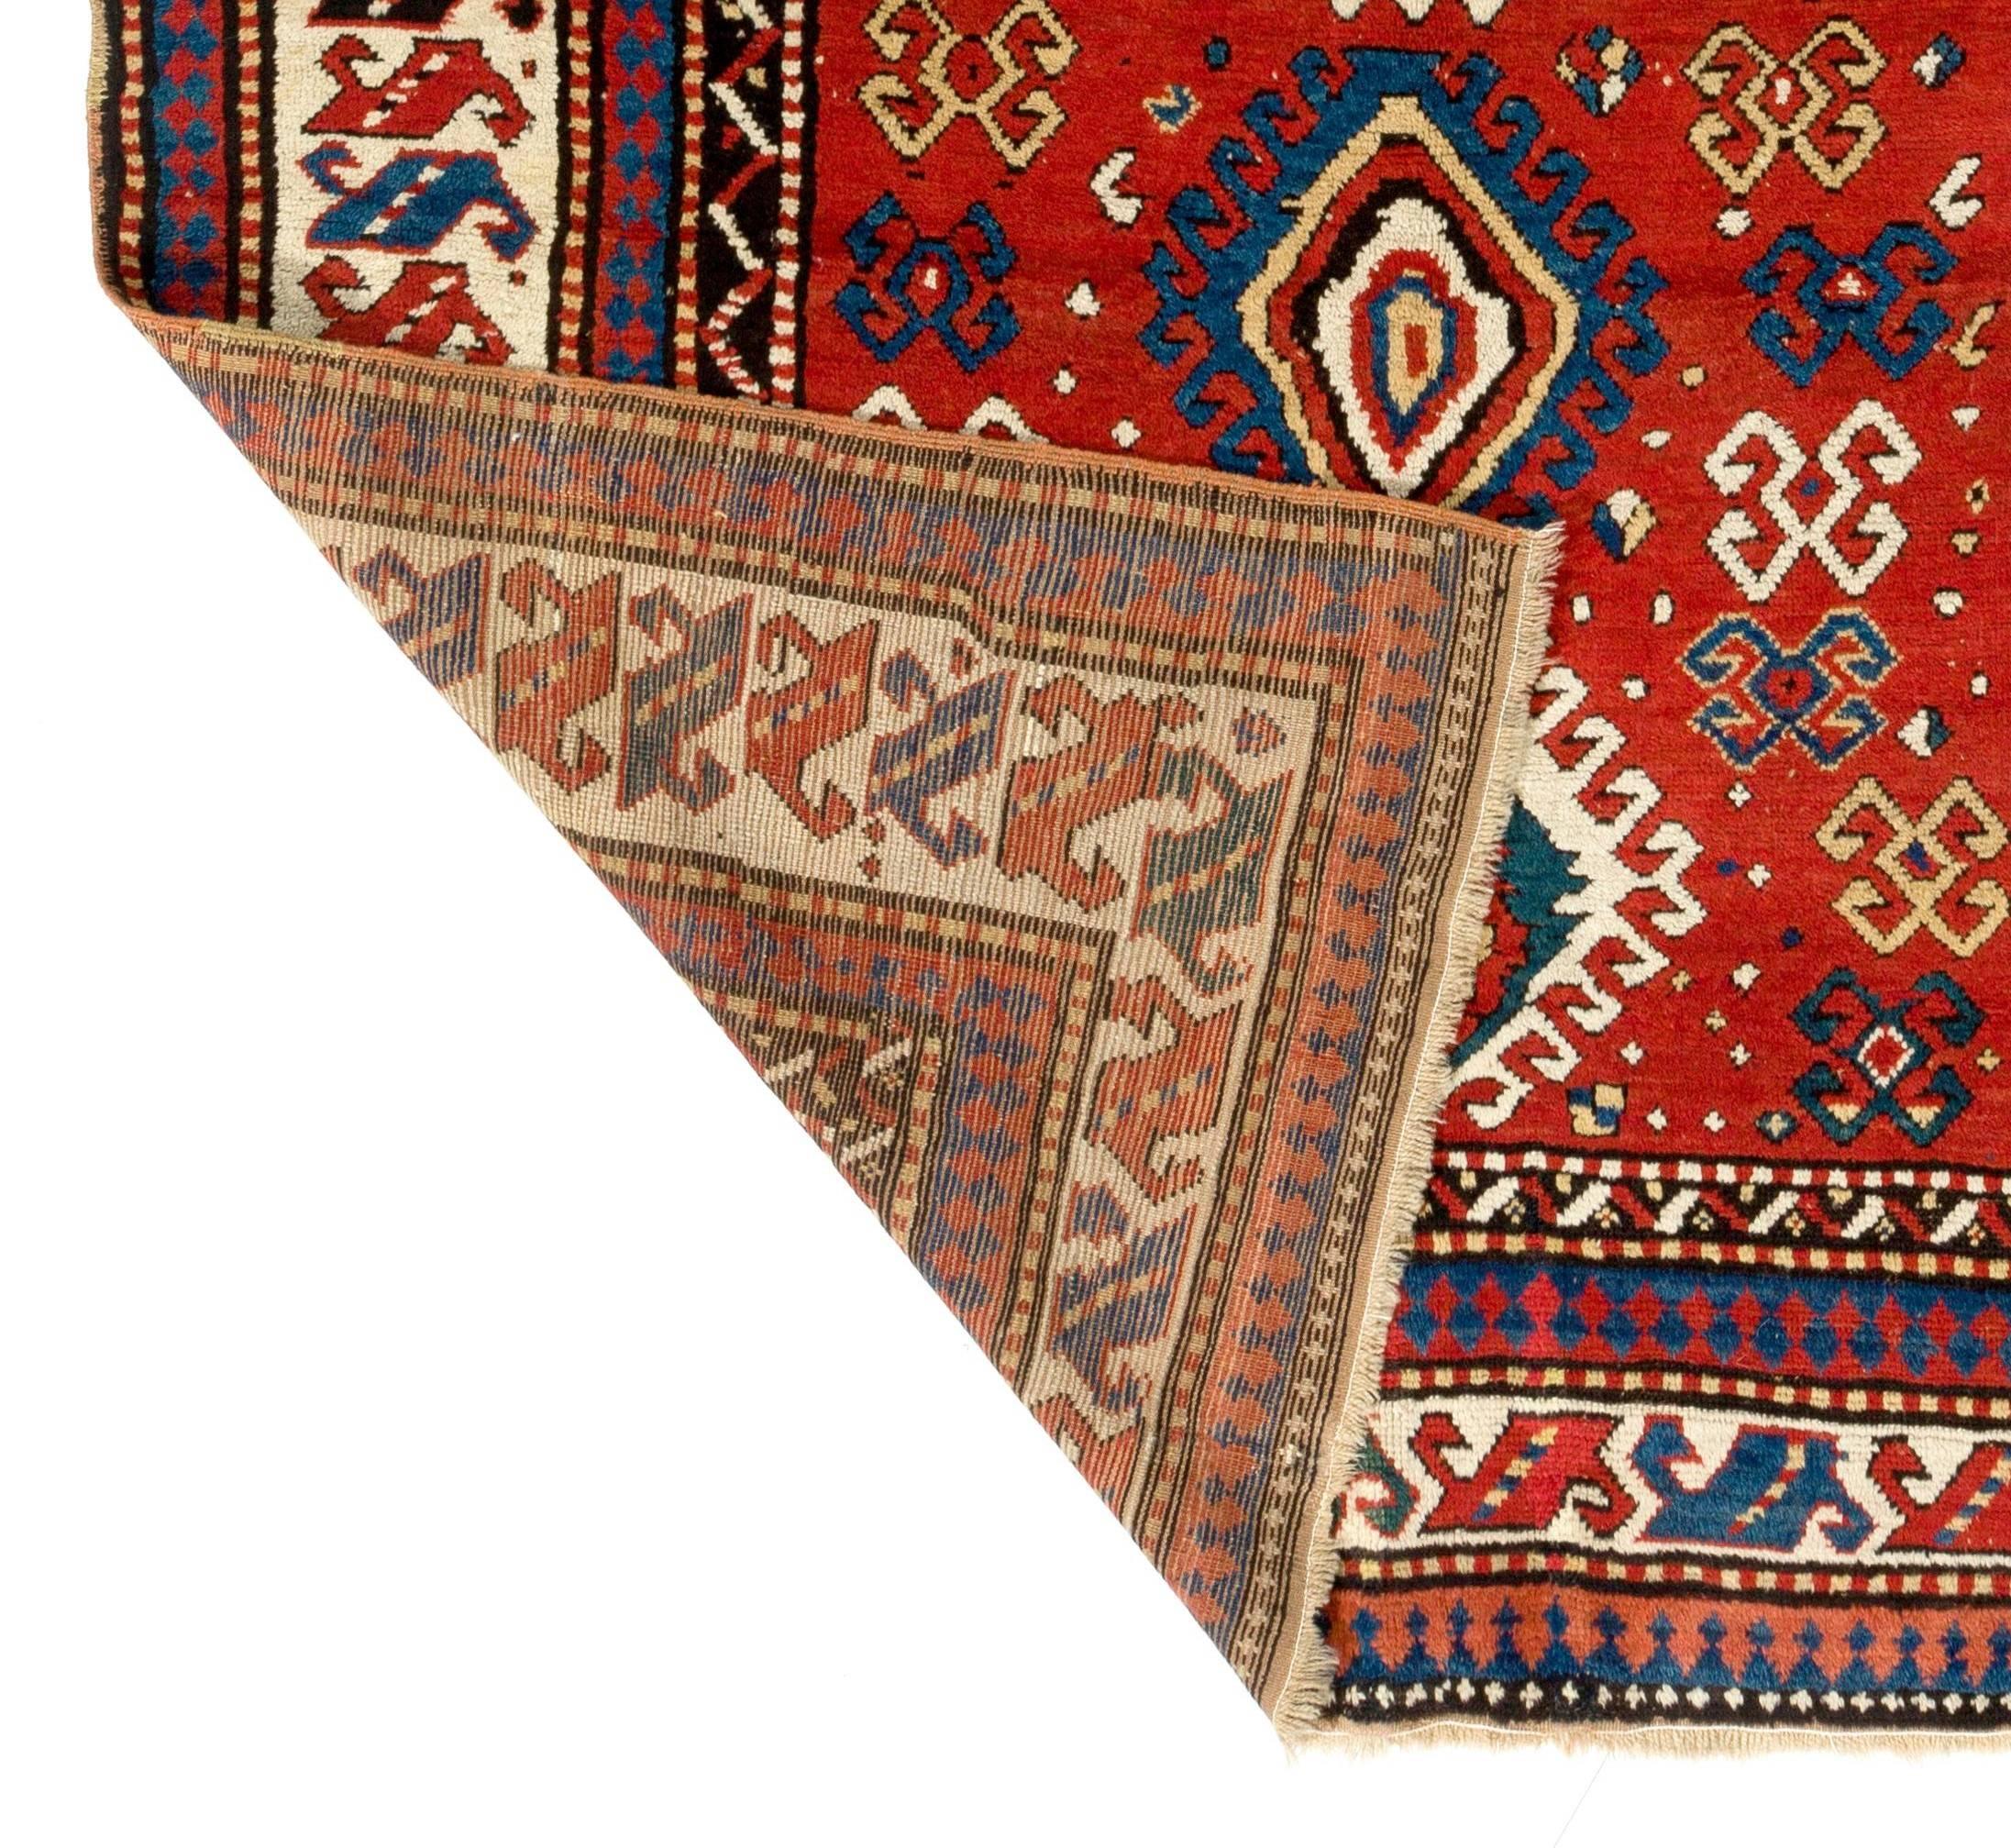 A South Caucasian Kazak rug with an archaic design and wonderfully saturated natural dyes. Very good condition with medium wool pile on wool foundation. Dates back to 1850s. 
Size: 5.6 x 8 ft.